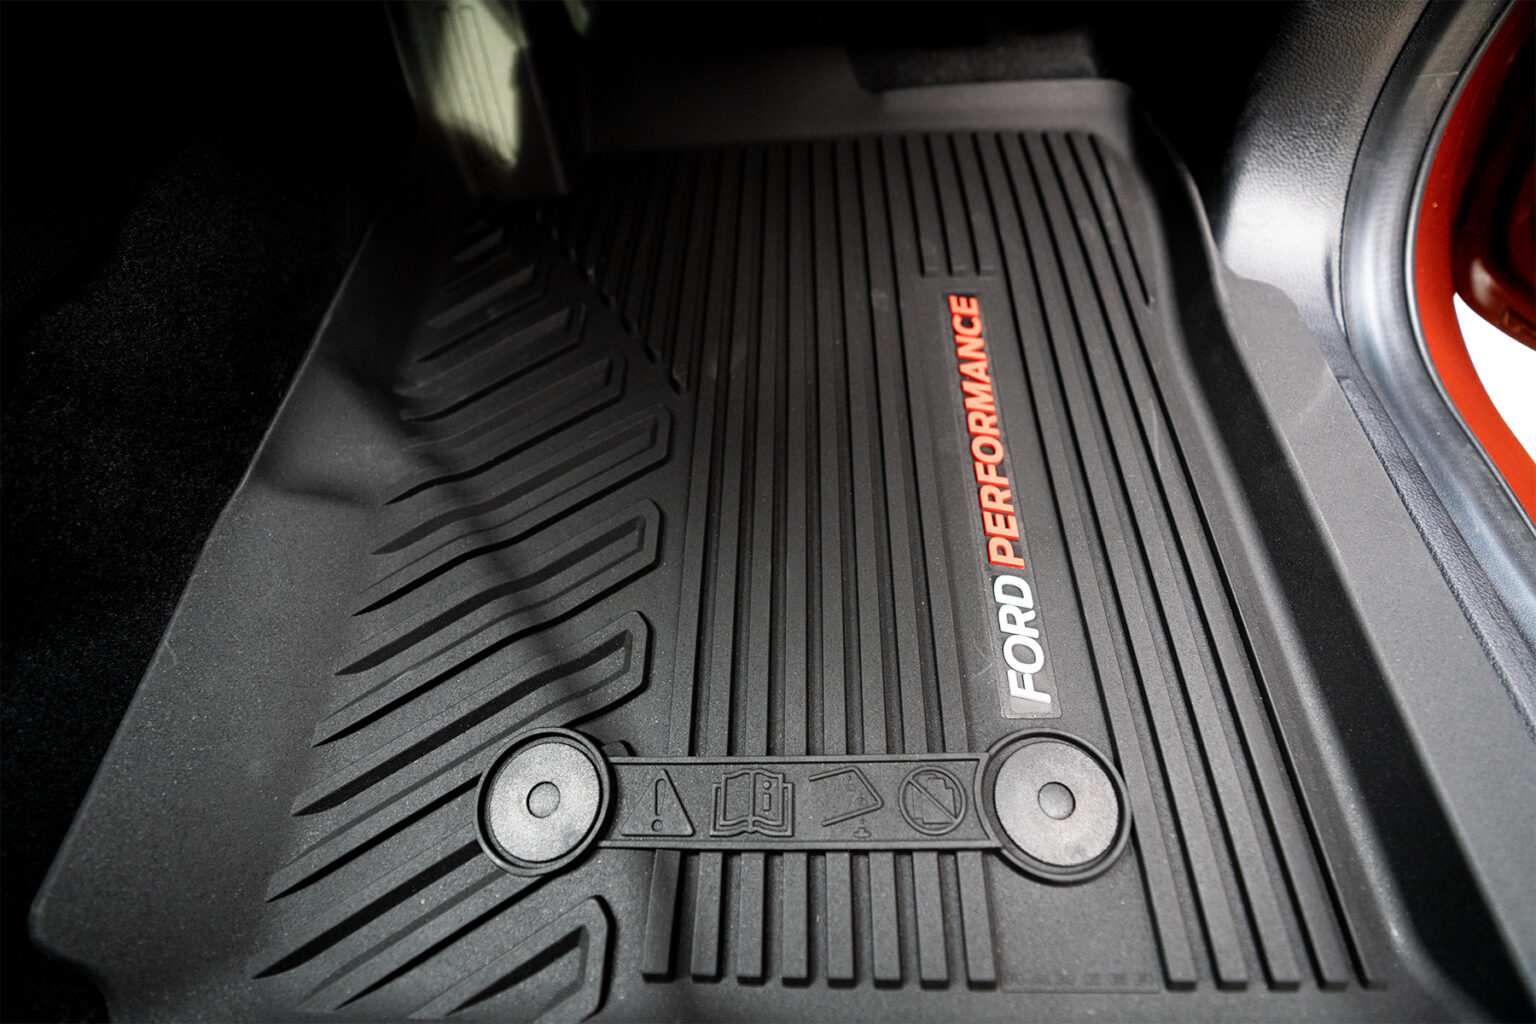 Genuine Ford Performance Floor Mats to suit Next Gen Ford Ranger ...